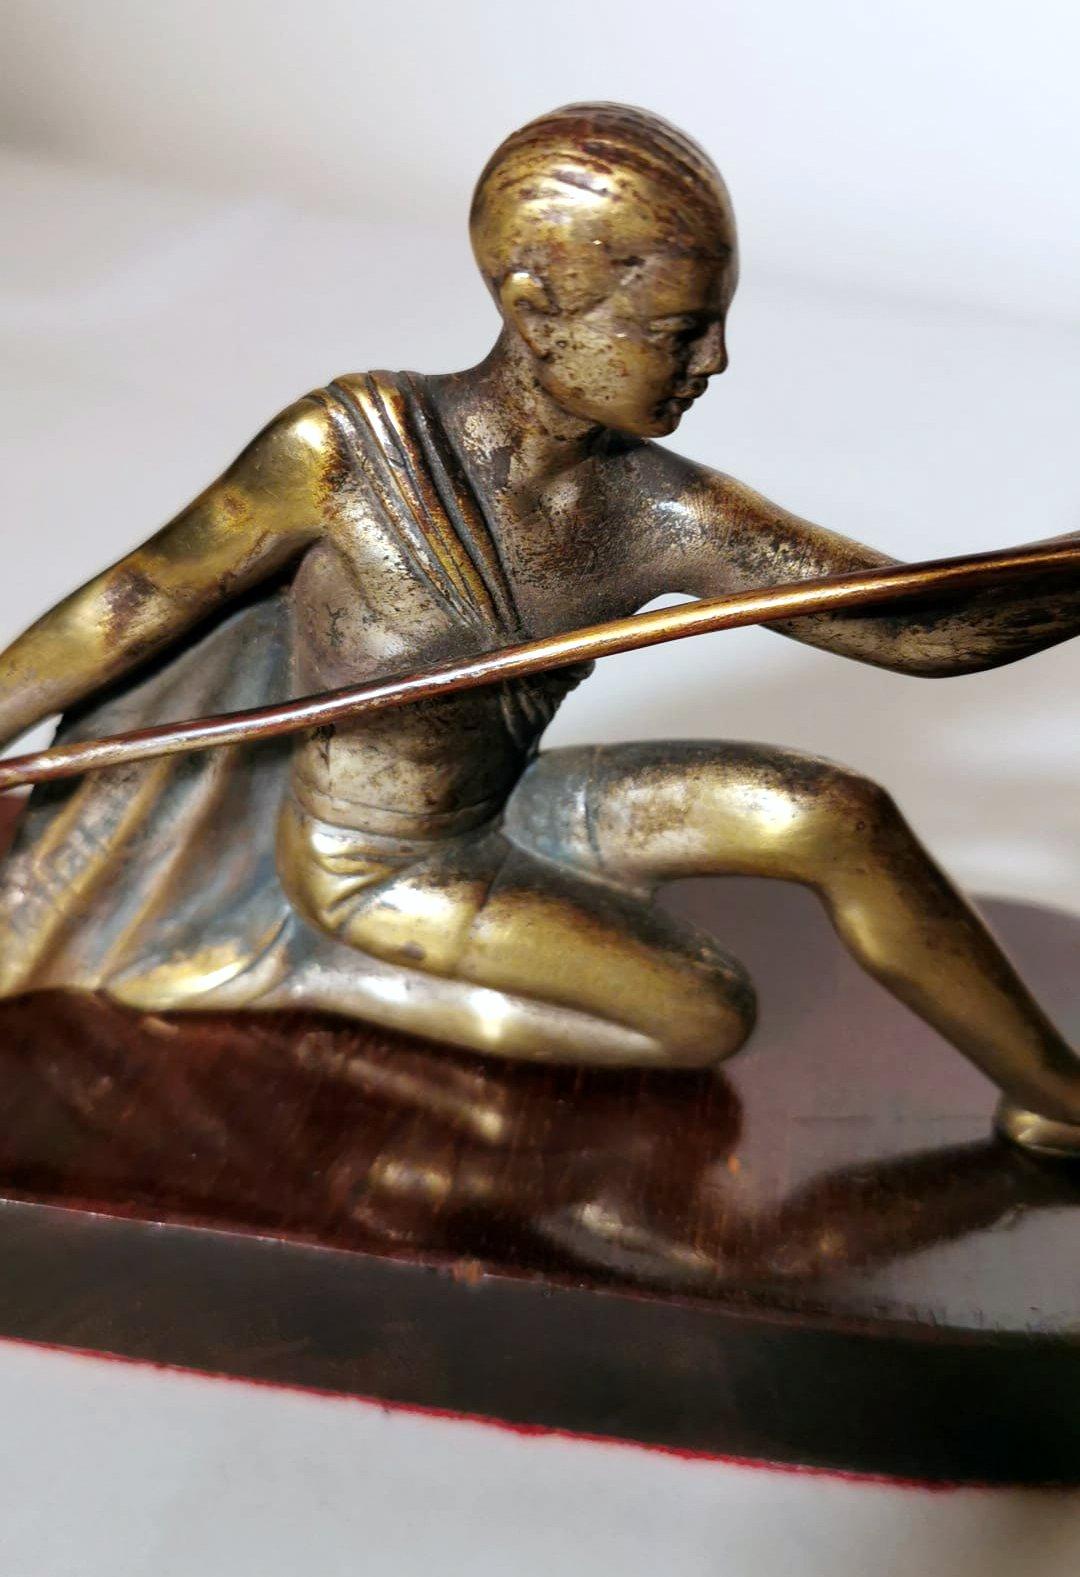 Art Deco Bronze Statuette Depicting A Young Gymnast In Good Condition For Sale In Prato, Tuscany